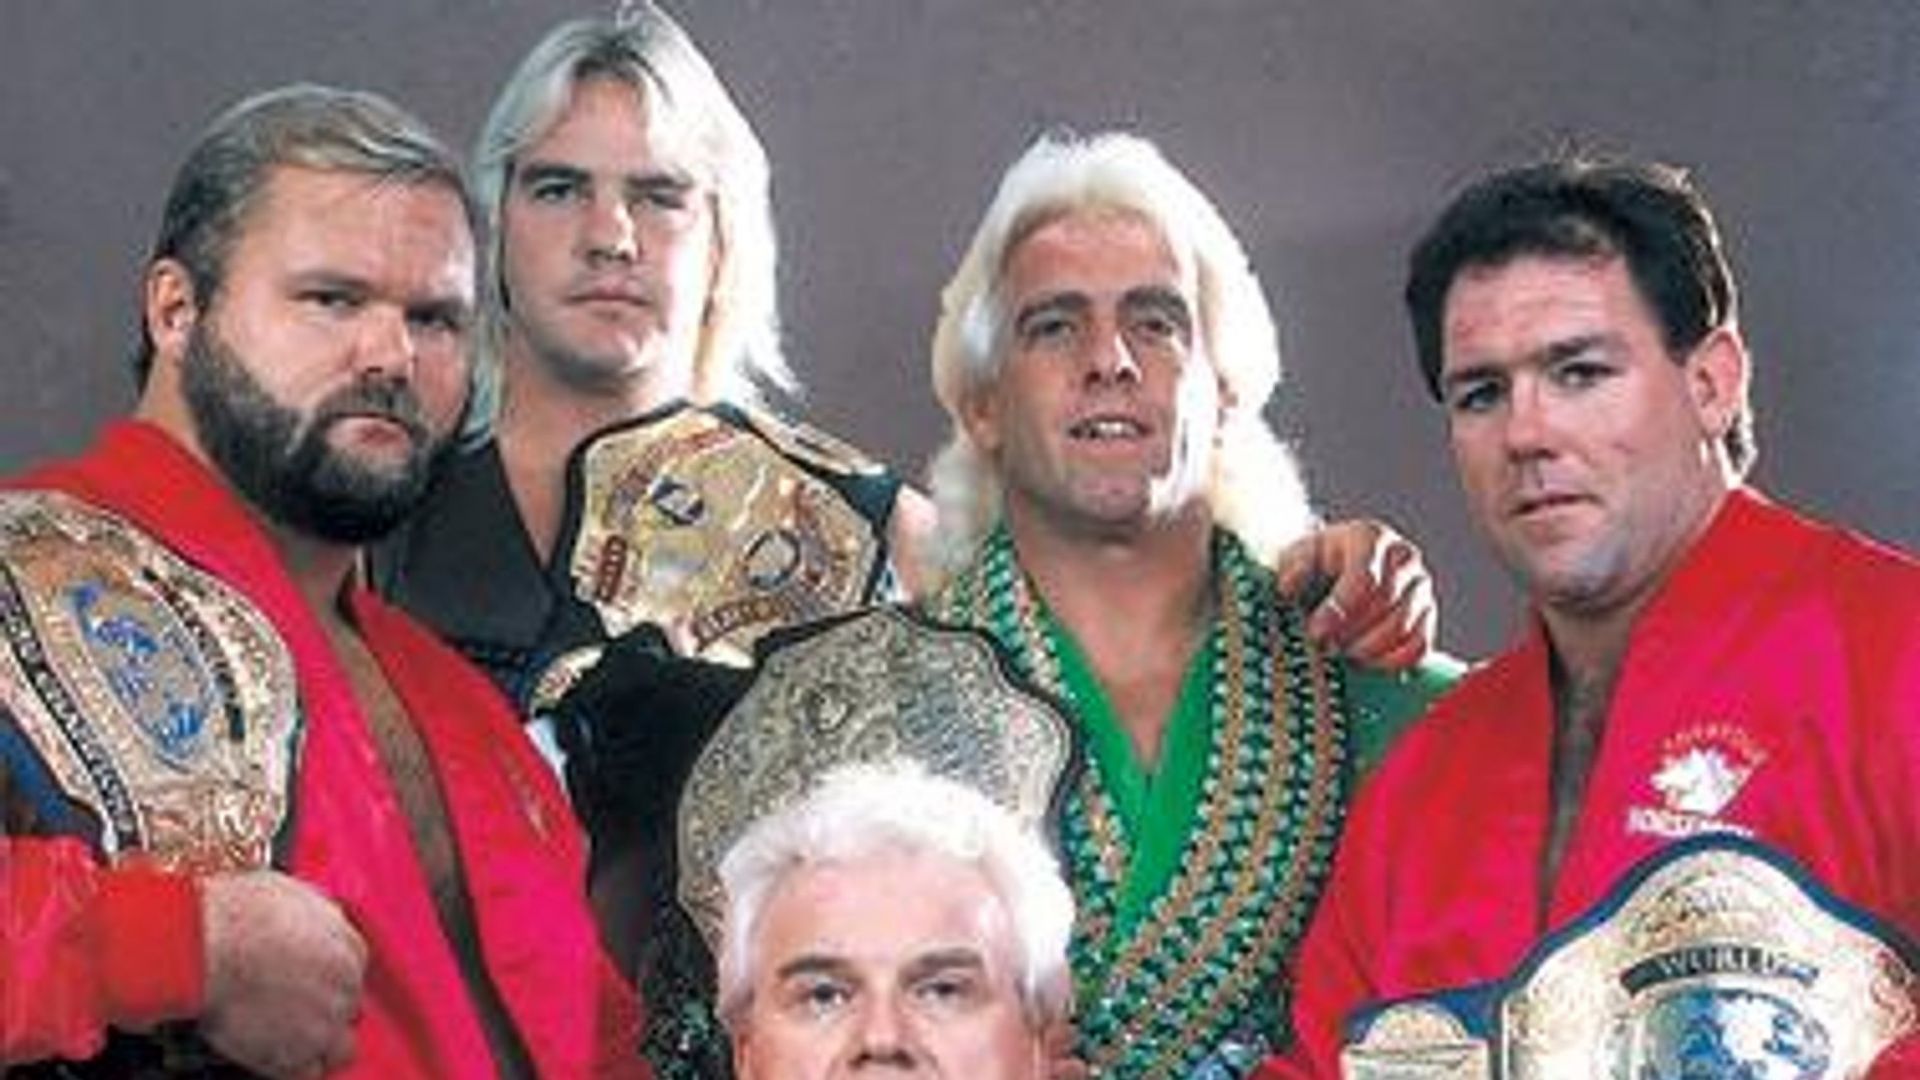 Diamonds are forever...and so are The Four Horsemen!